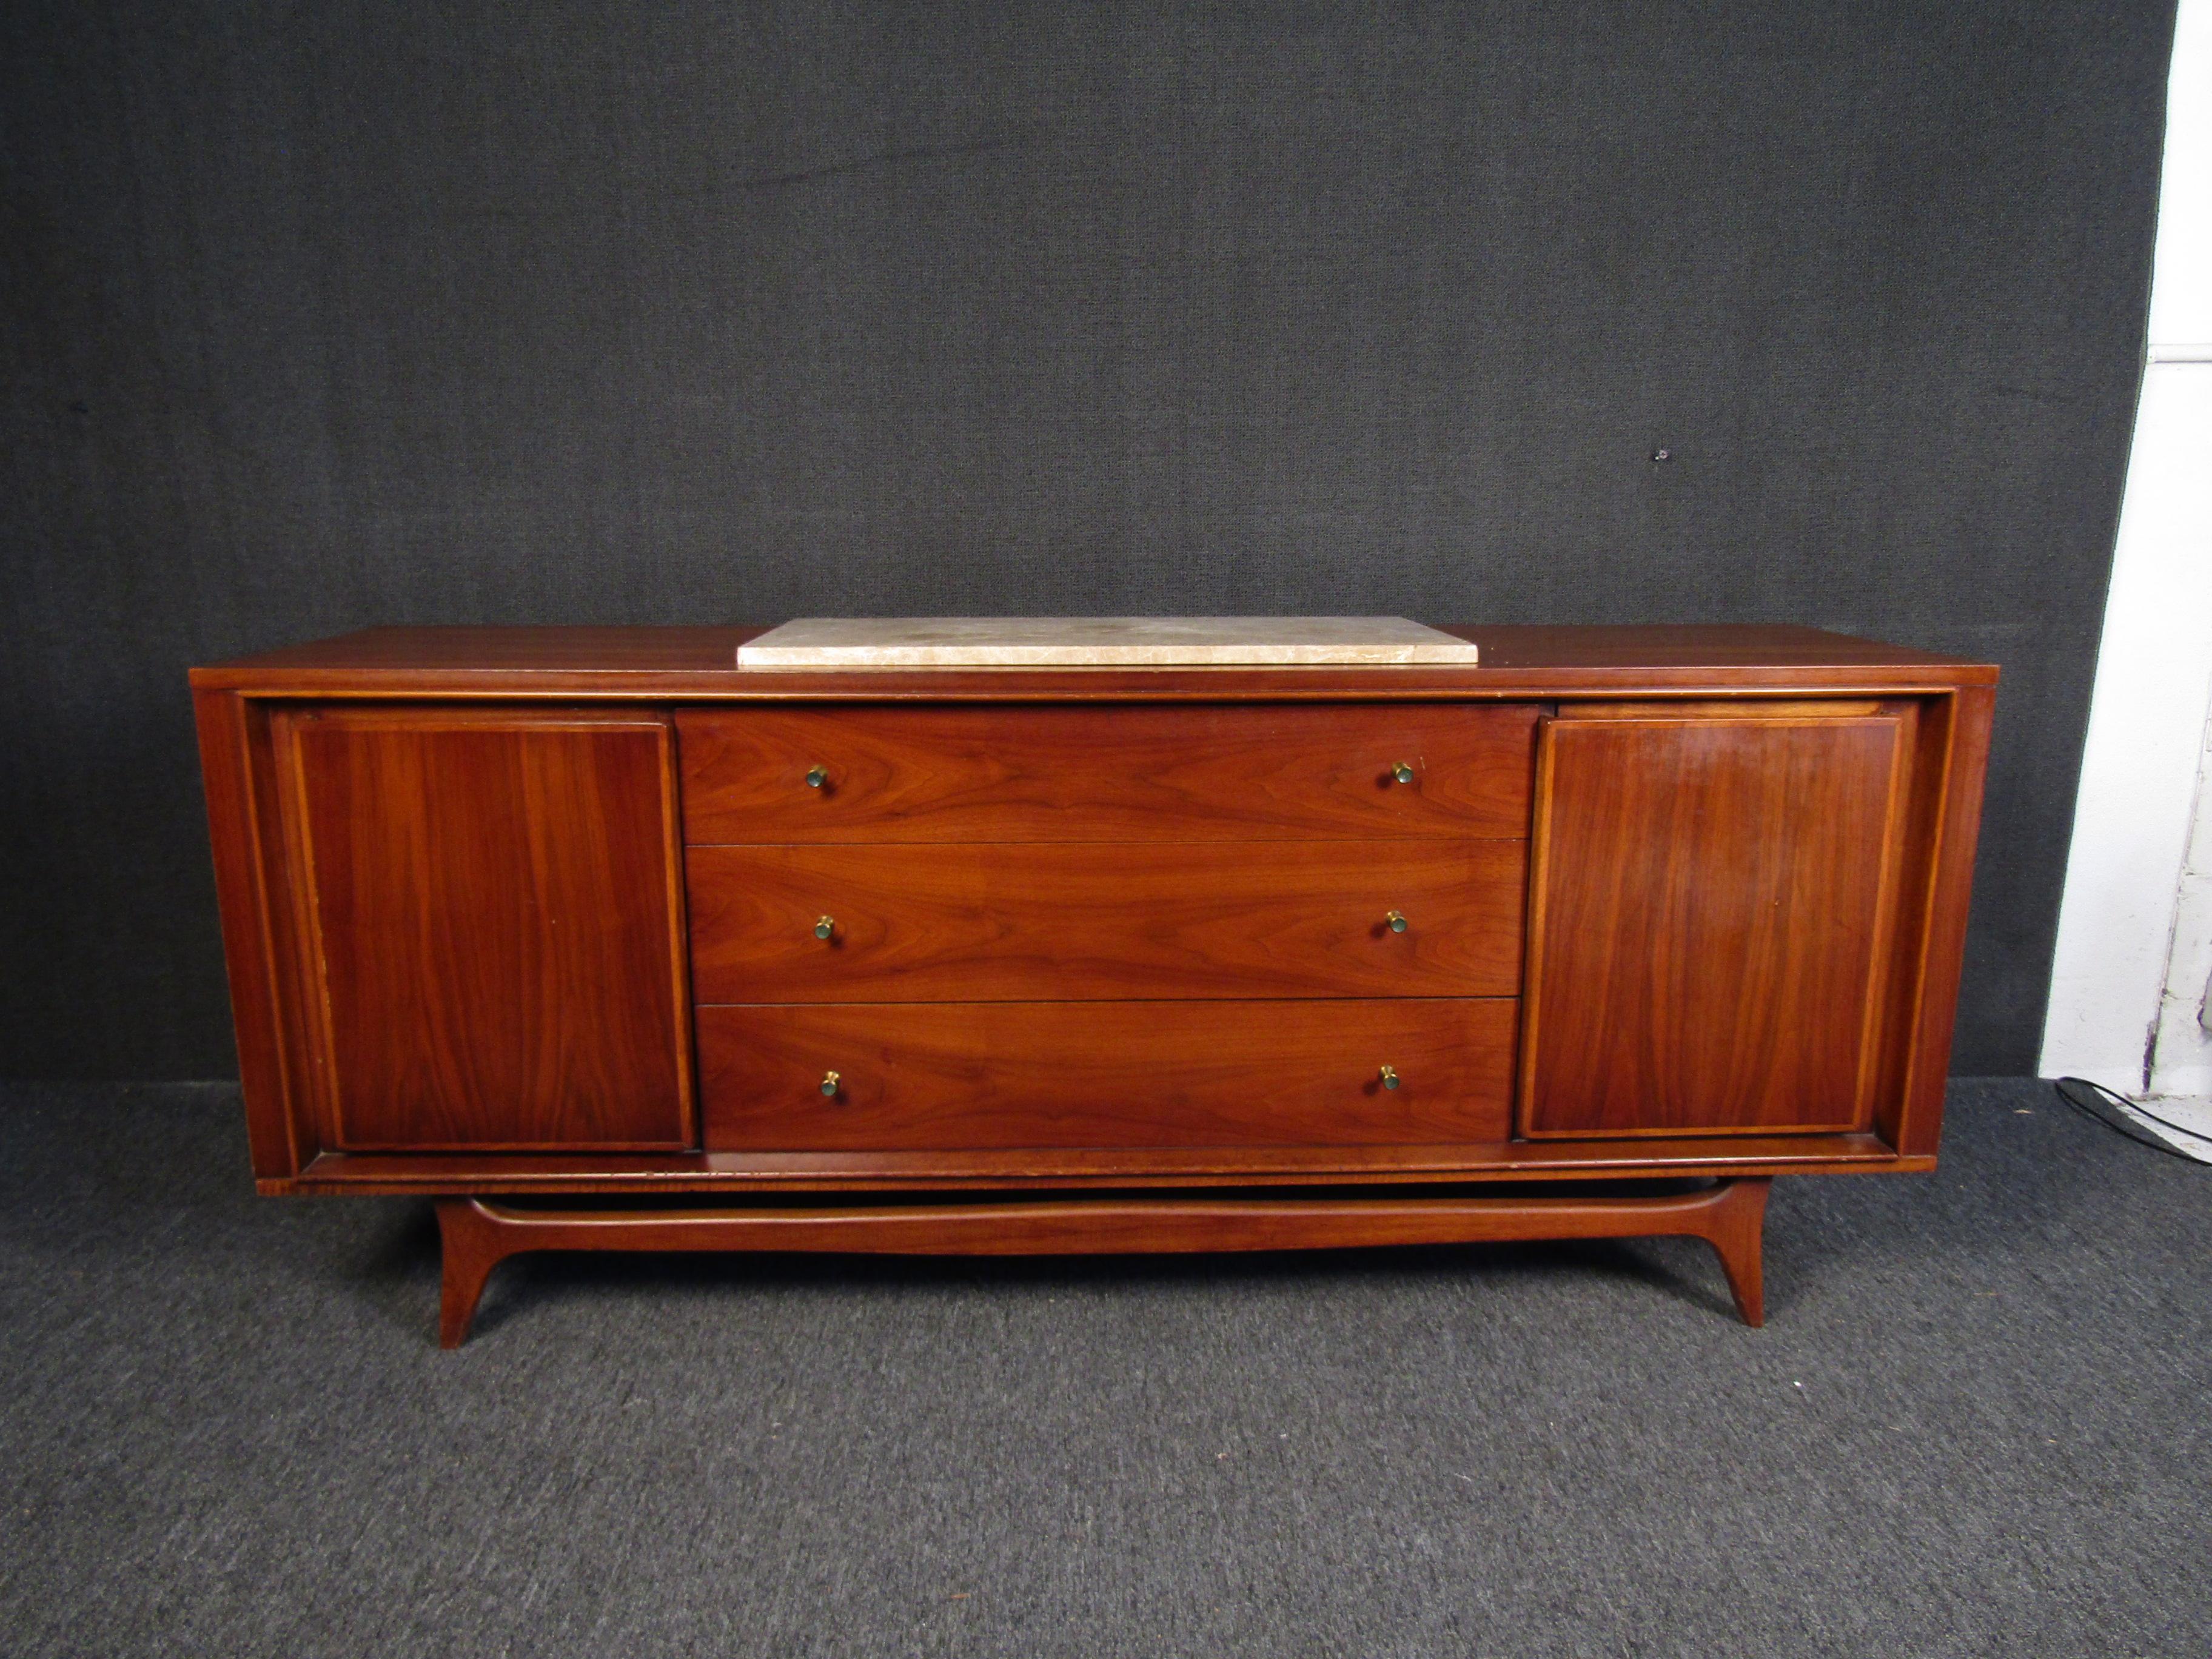 Kent-Coffey walnut credenza with marble insert. Featuring brass knobs and vibrant walnut, this credenza is well constructed and in very good shape.

Please confirm item location (NY or NJ).
 